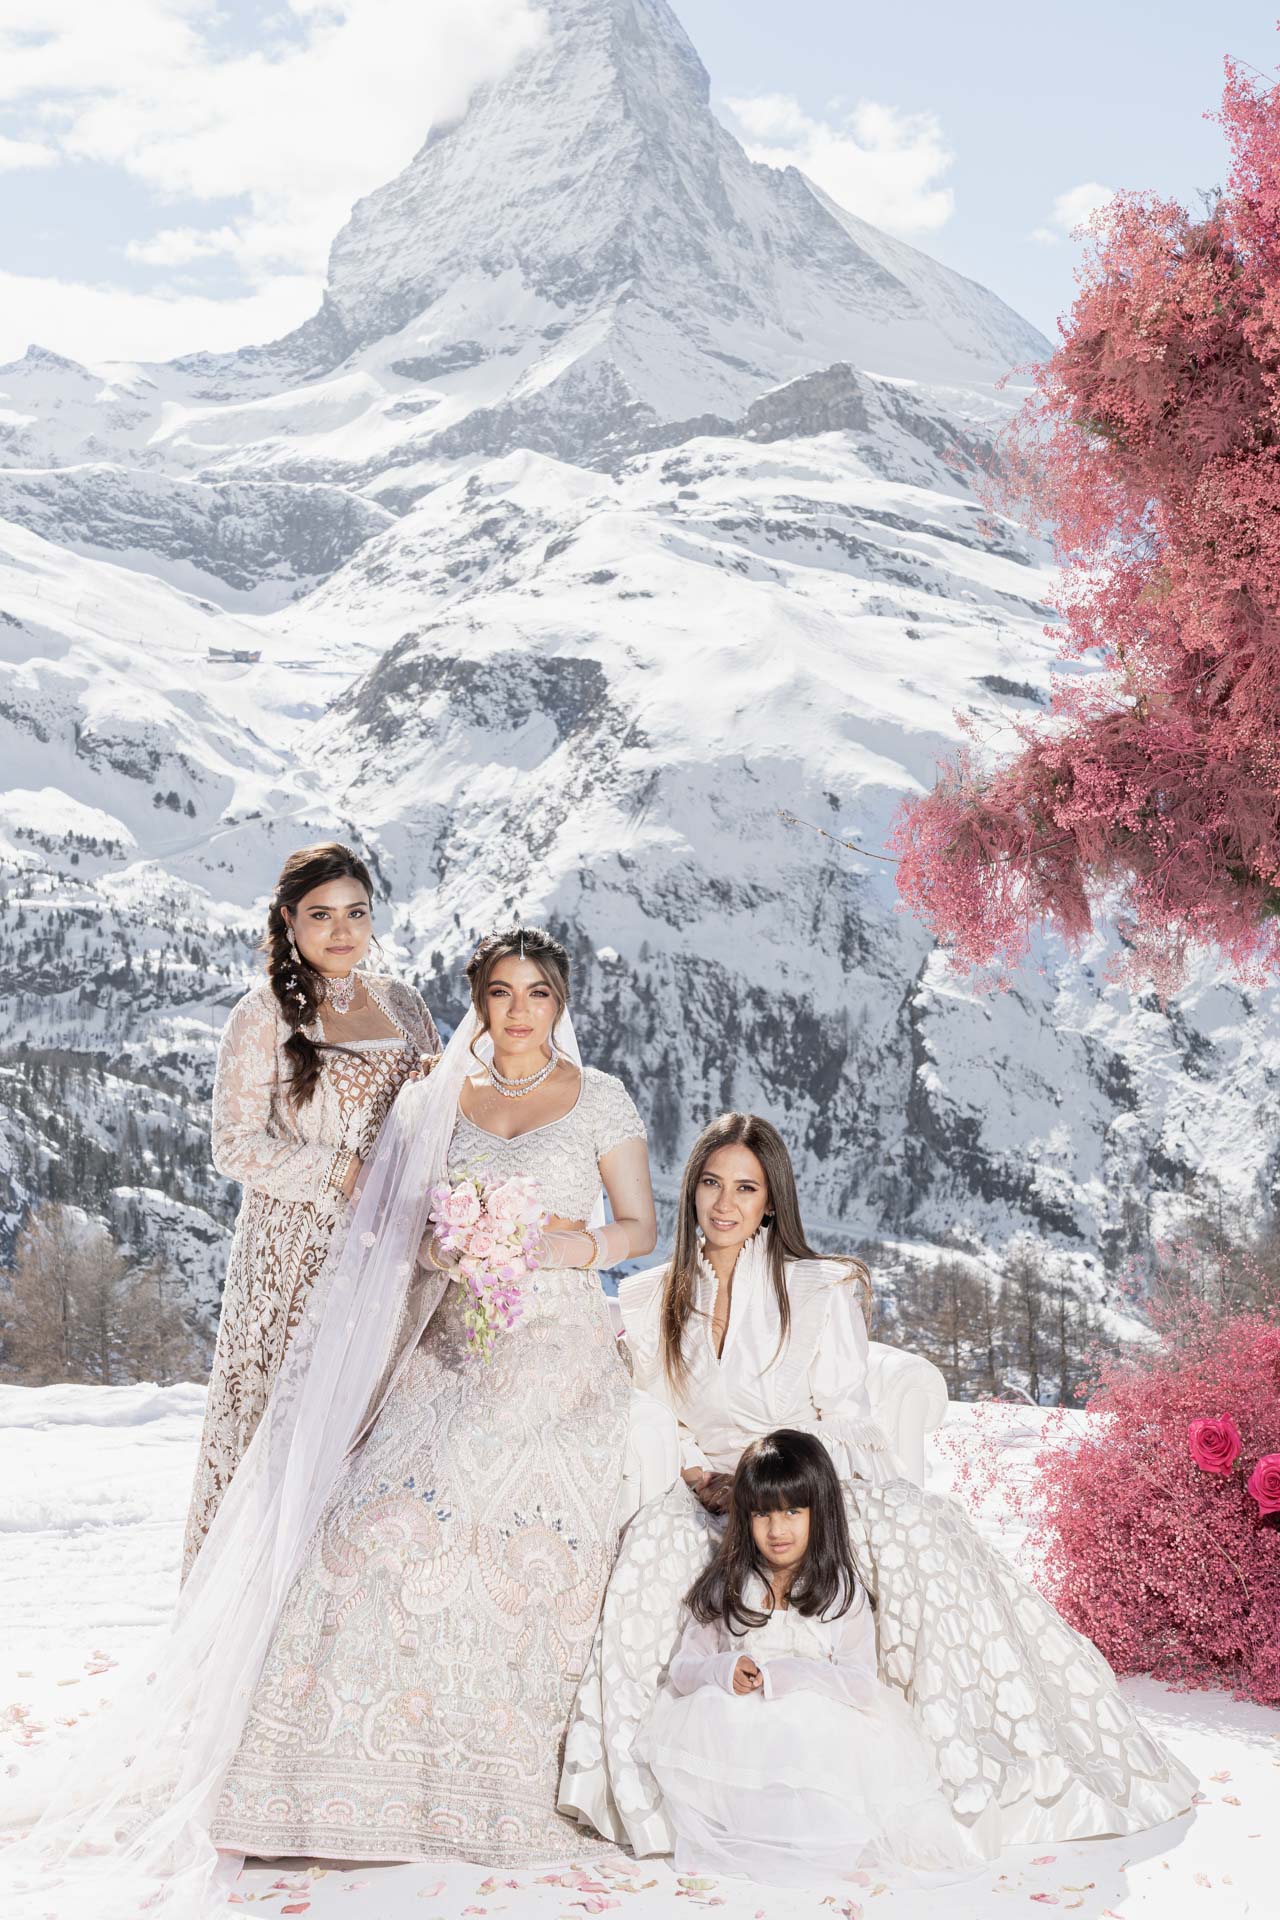 A wedding on the slopes of Matterhorn mountain, between the white of snow and the colors of India :: 41